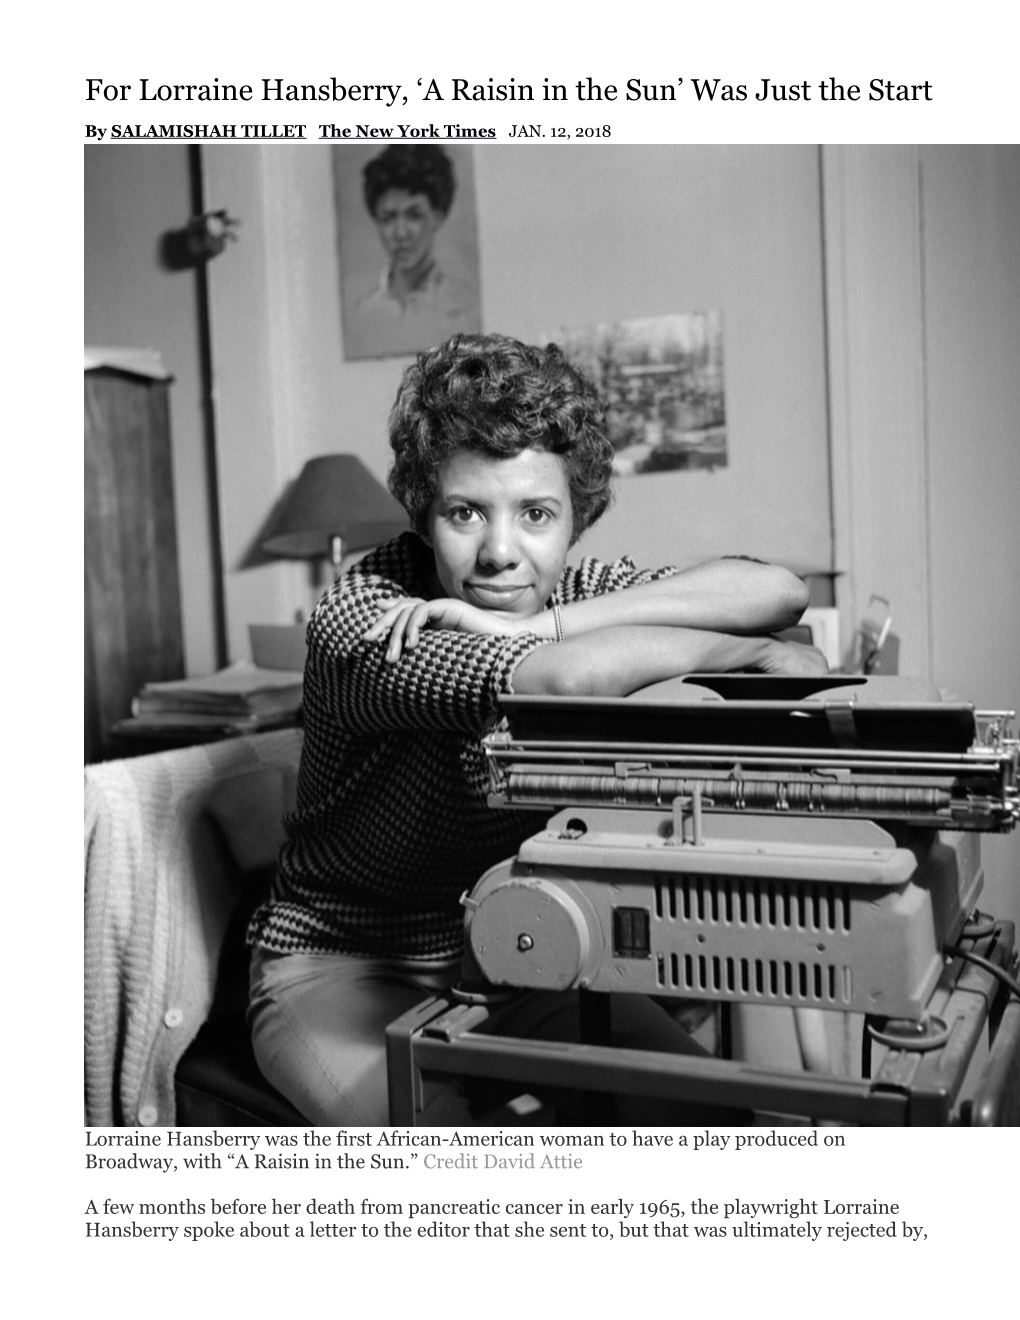 For Lorraine Hansberry, a Raisin in the Sun Was Just the Start